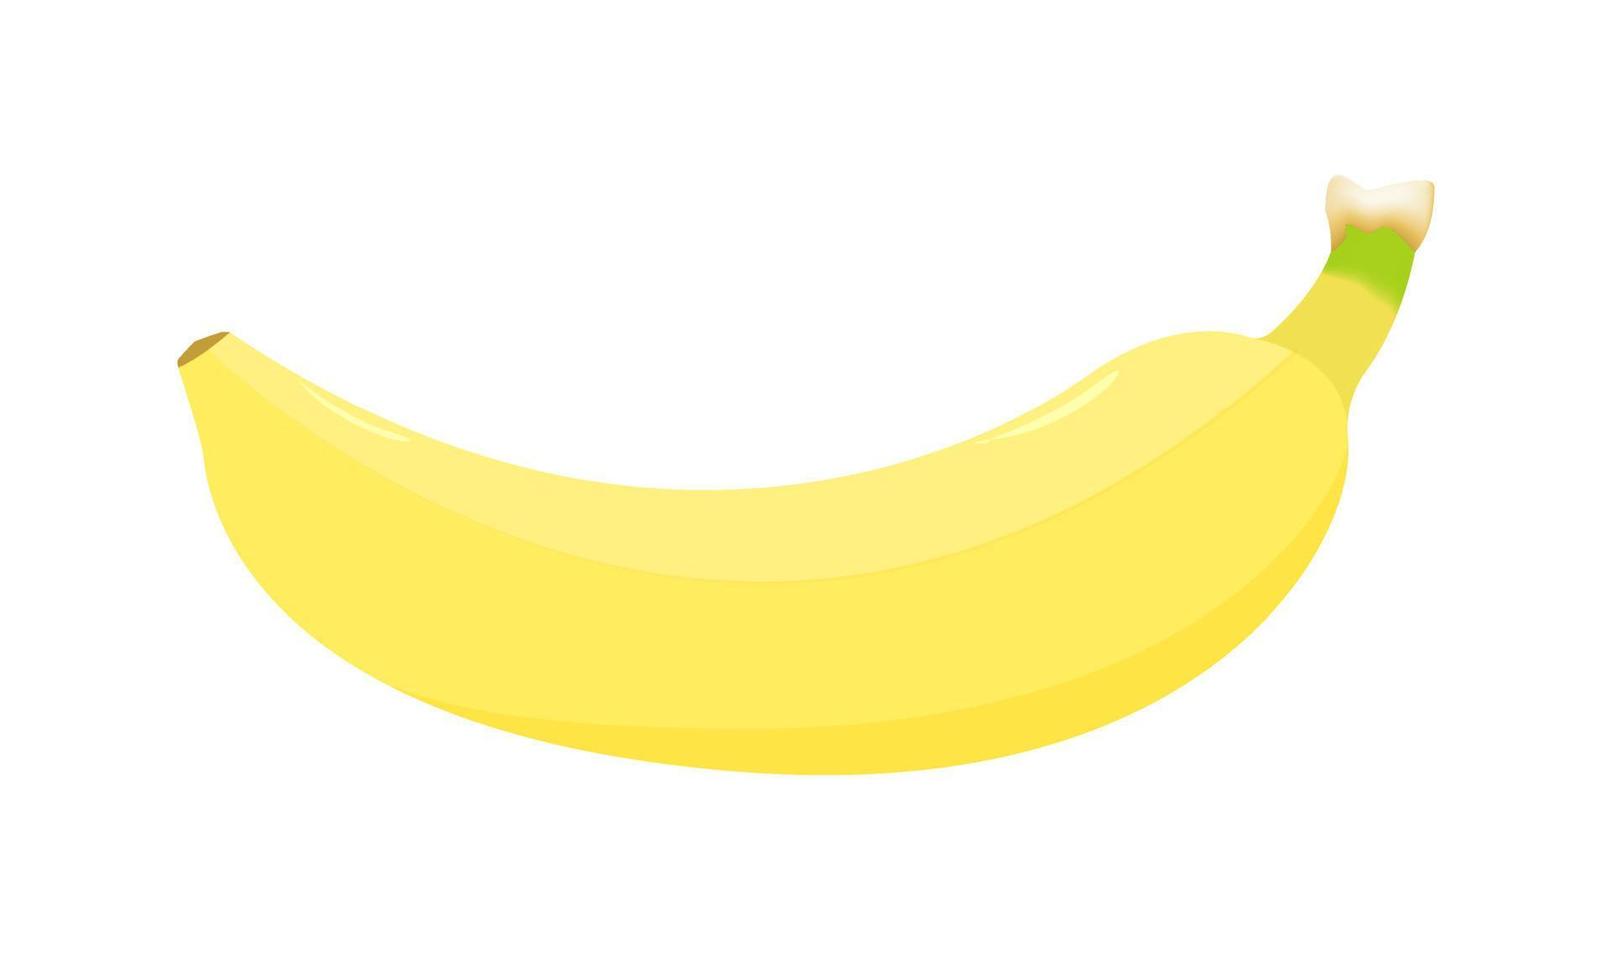 A banana fruit on a white background. It has a sweet taste, nutrients and vitamins which provide energy for health. vector